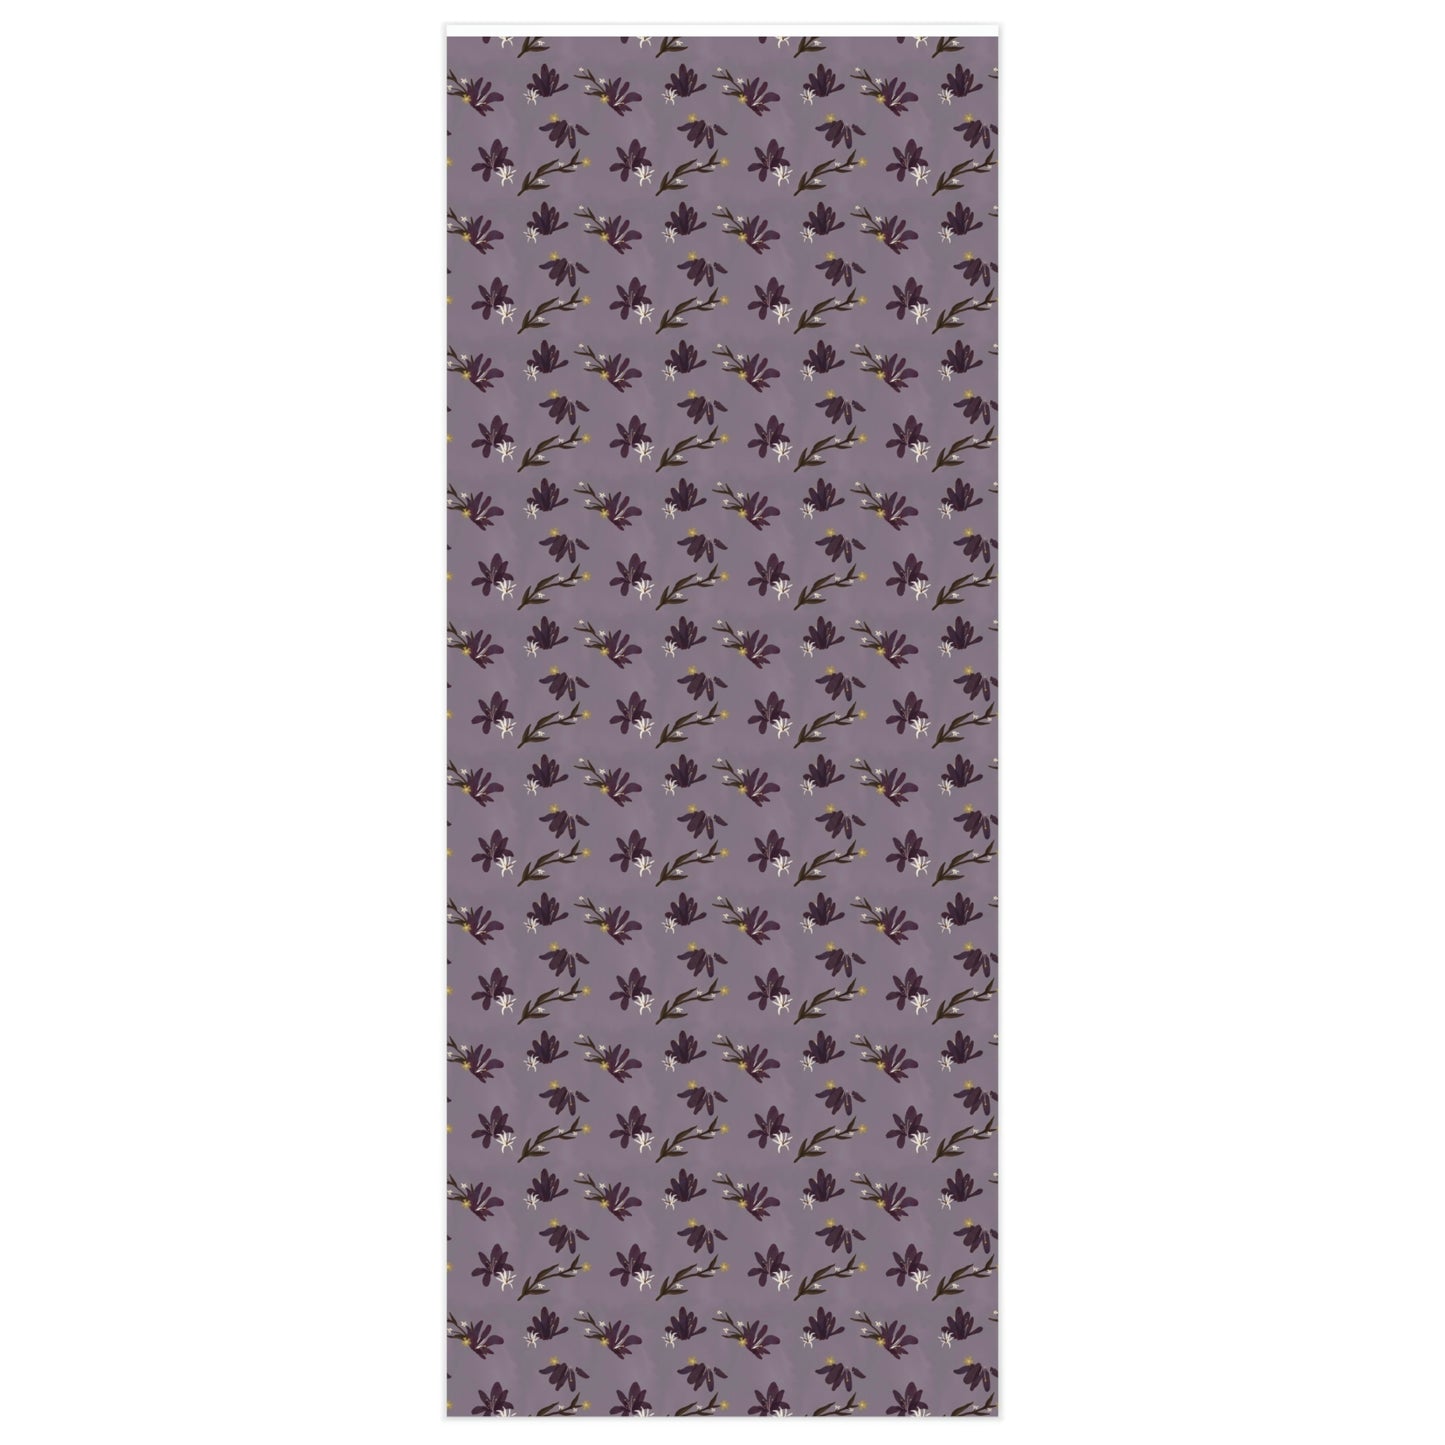 Purple Floral Wrapping Paper